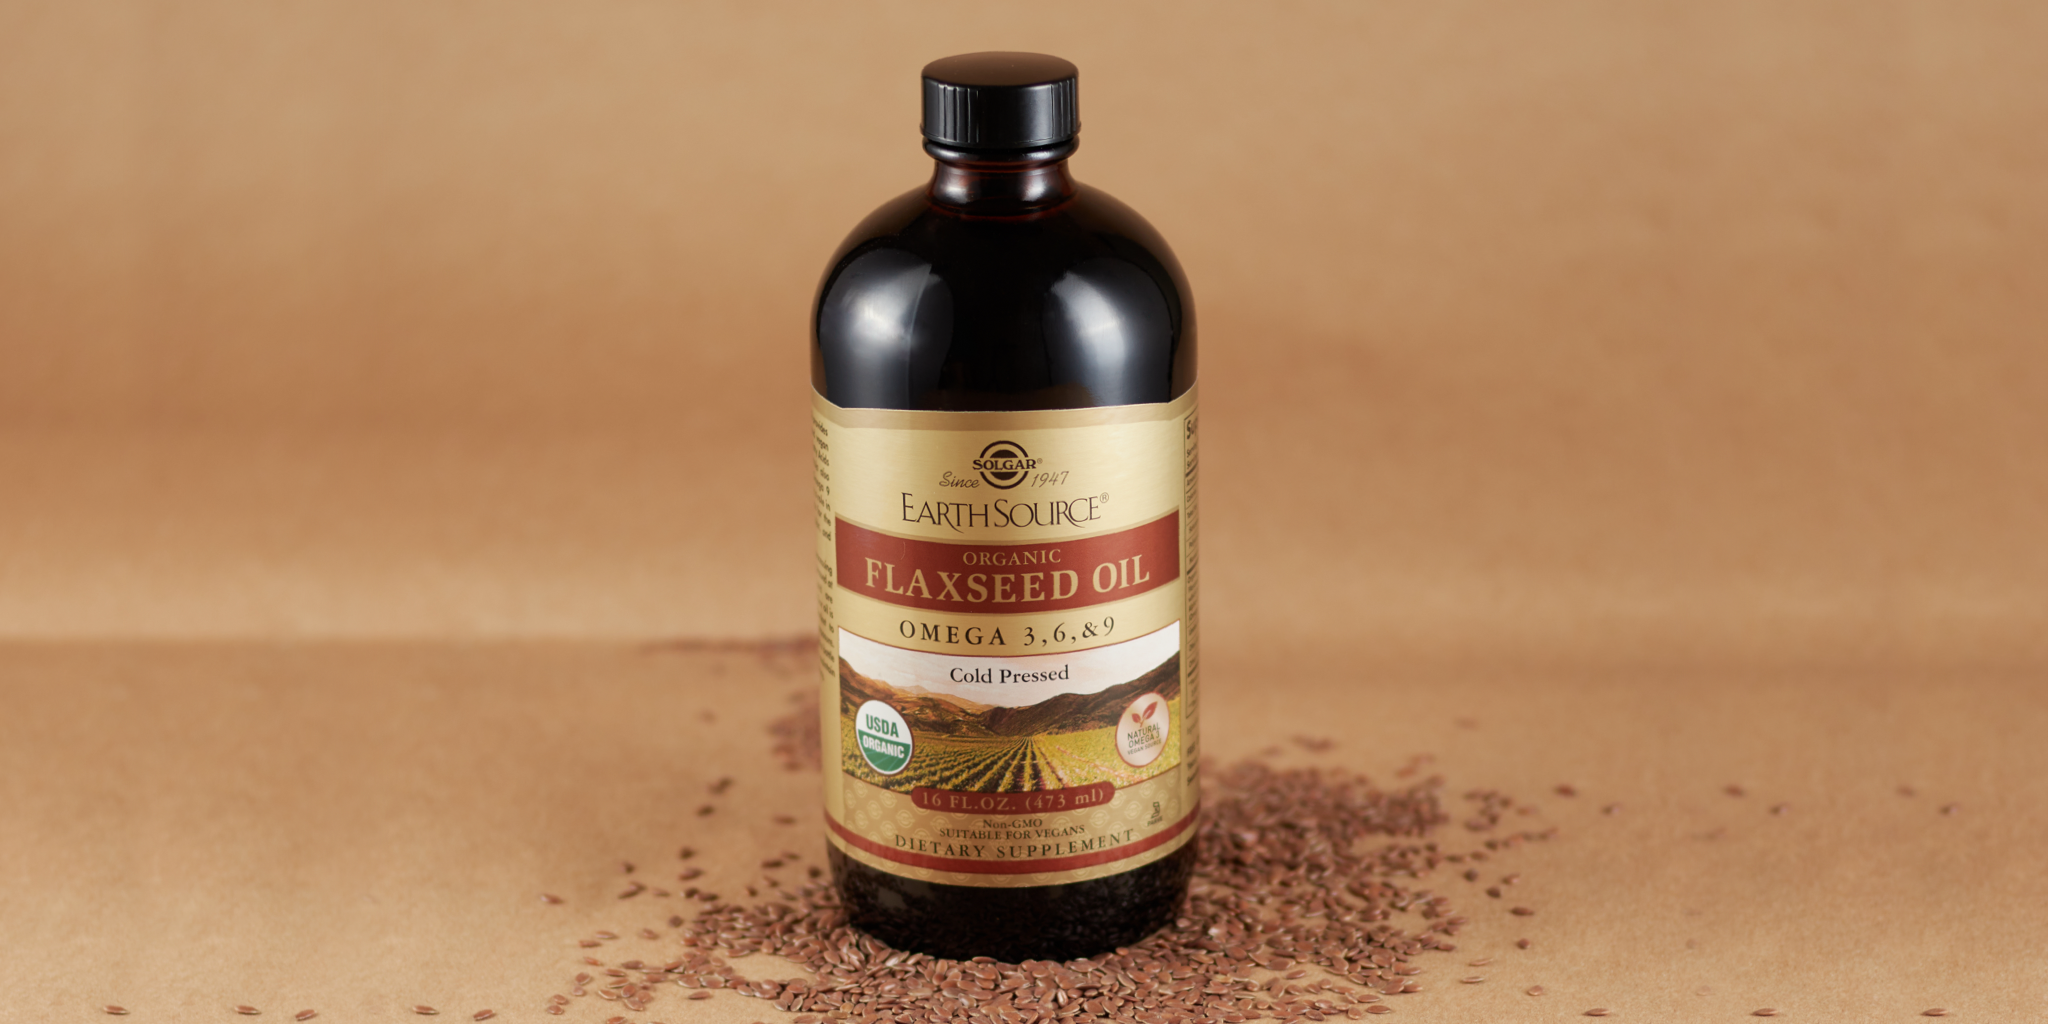 An amber glass bottle of Solgar Earth Source Flaxseed Oil, on a brown background with loose flax seeds around it.